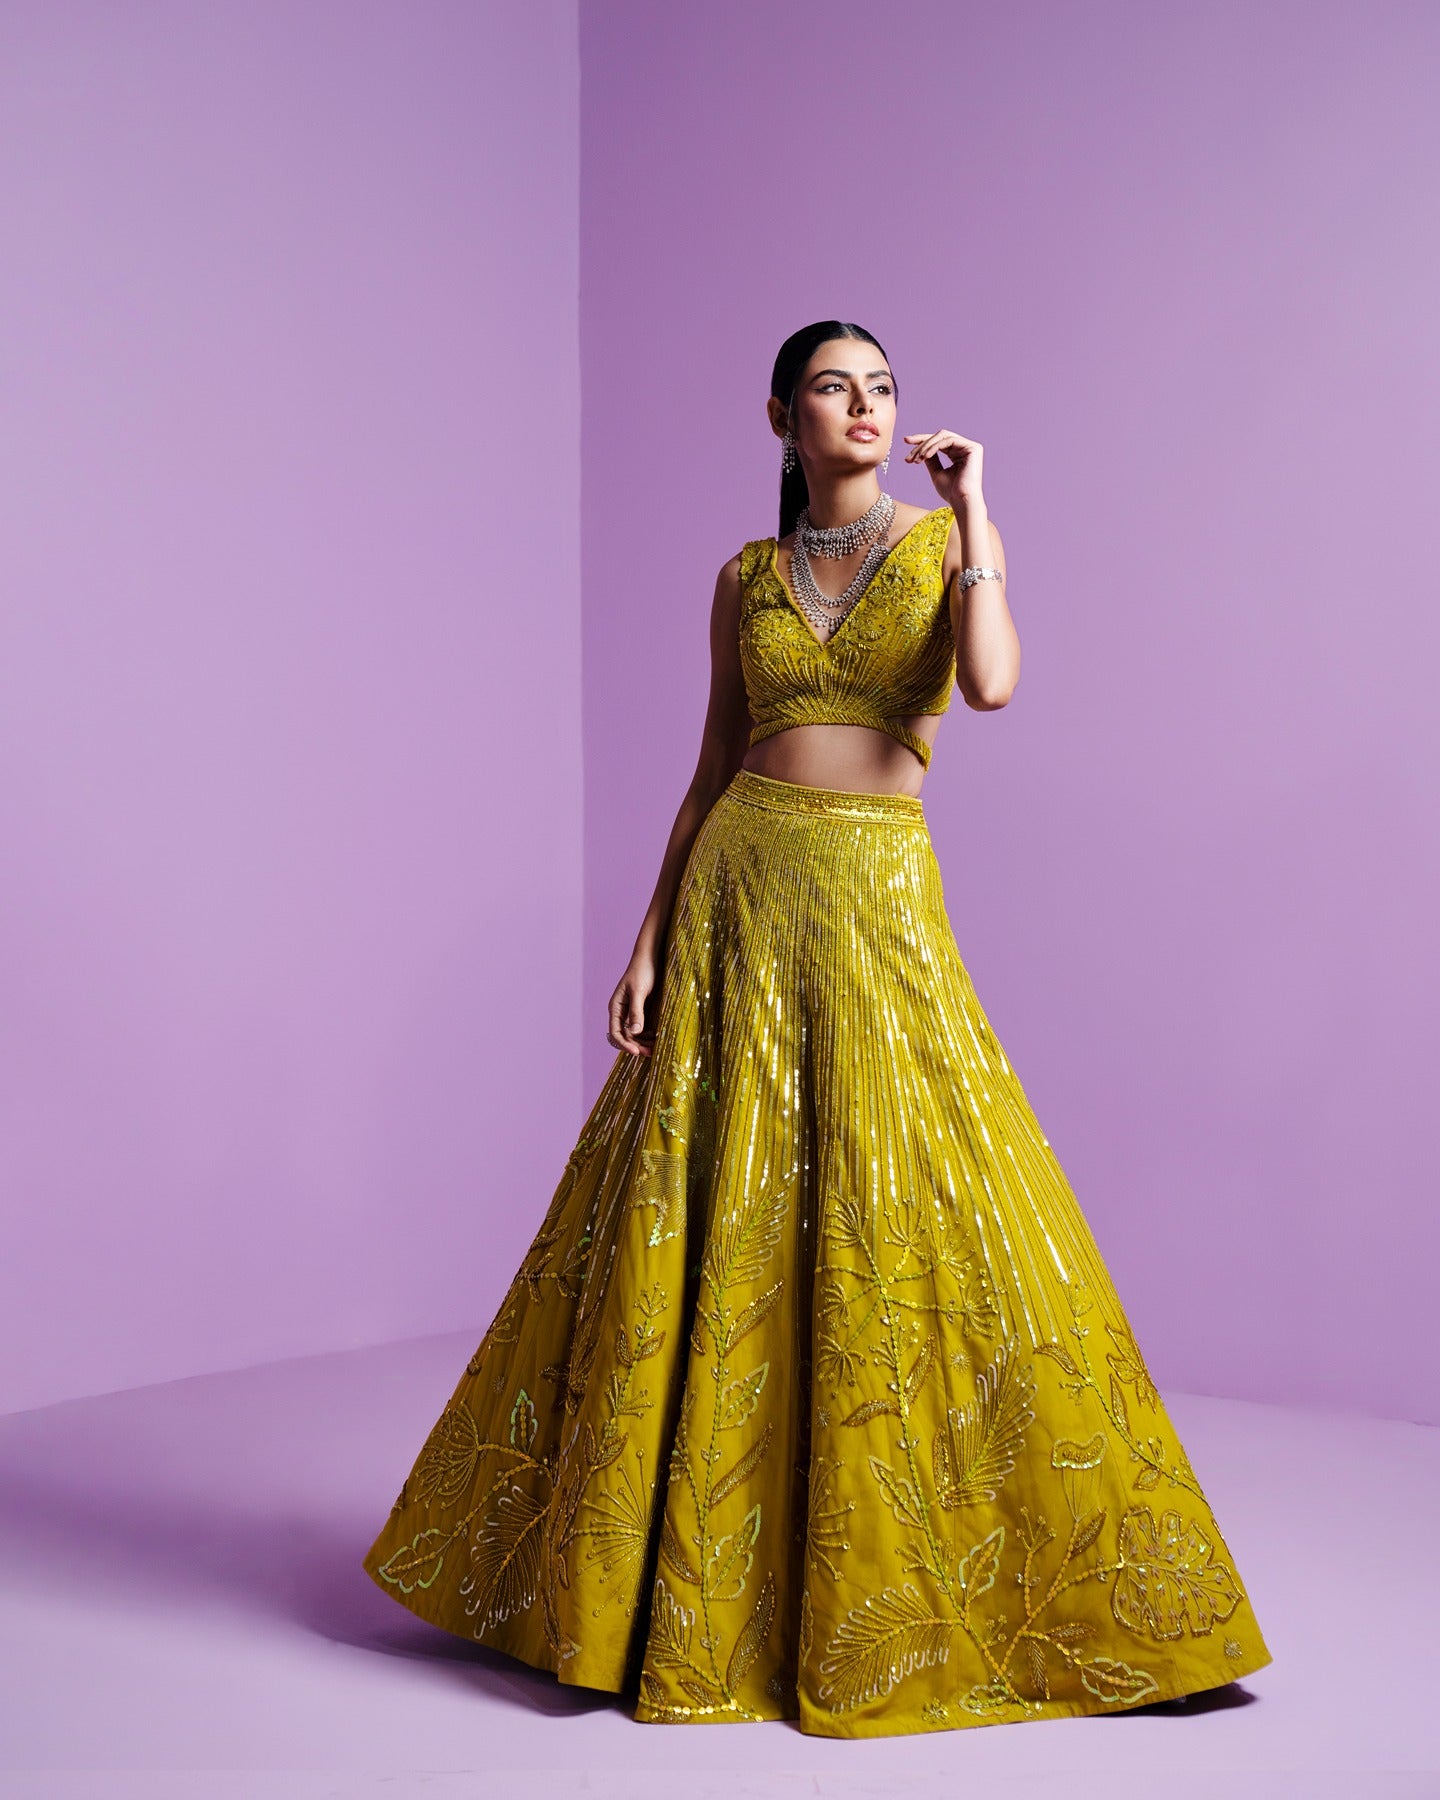 Drenched in the zest of lime green, this lehenga radiates vibrancy and joy. A burst of color that dances with every step, capturing the spirit of celebration and youthful exuberance.